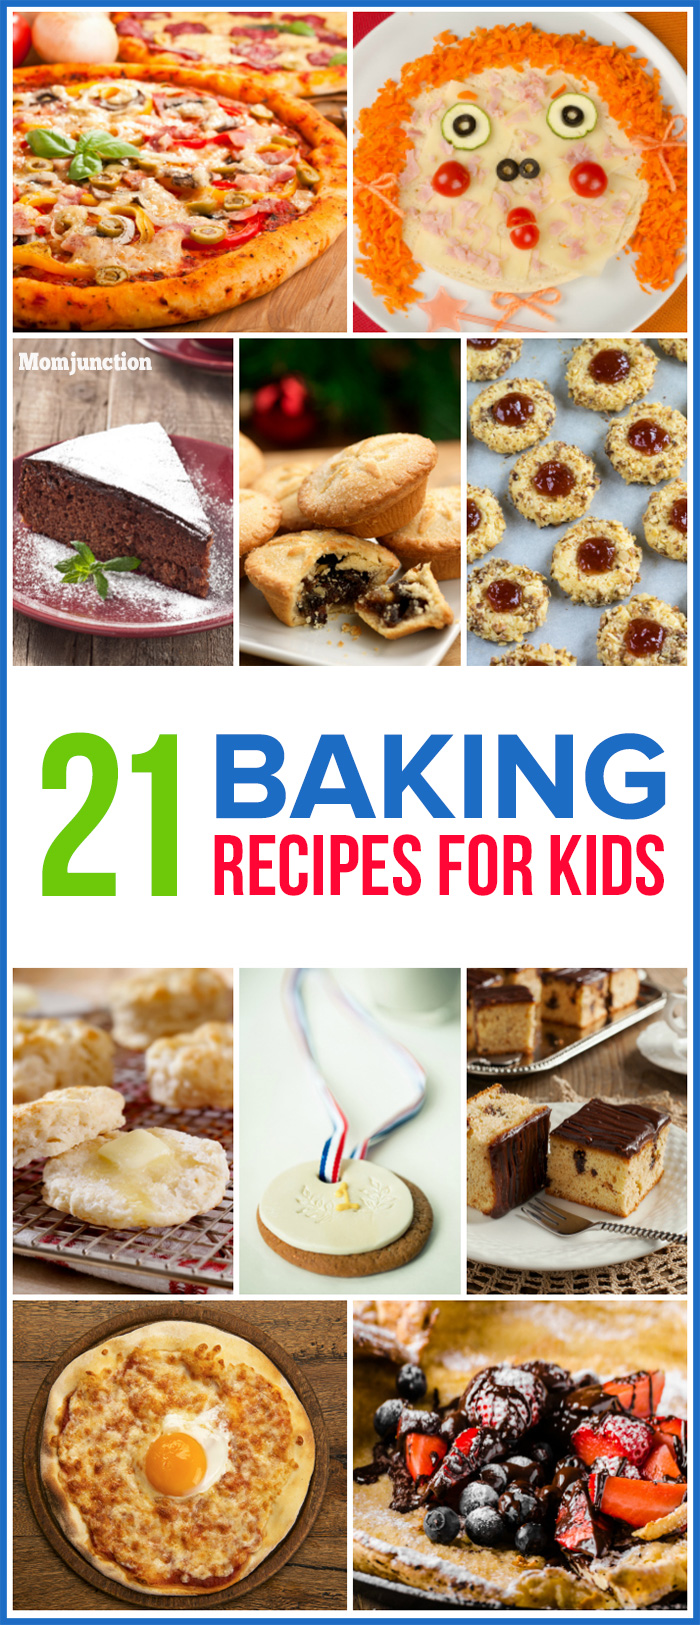 21 Healthy And Easy Baking Recipes For Kids